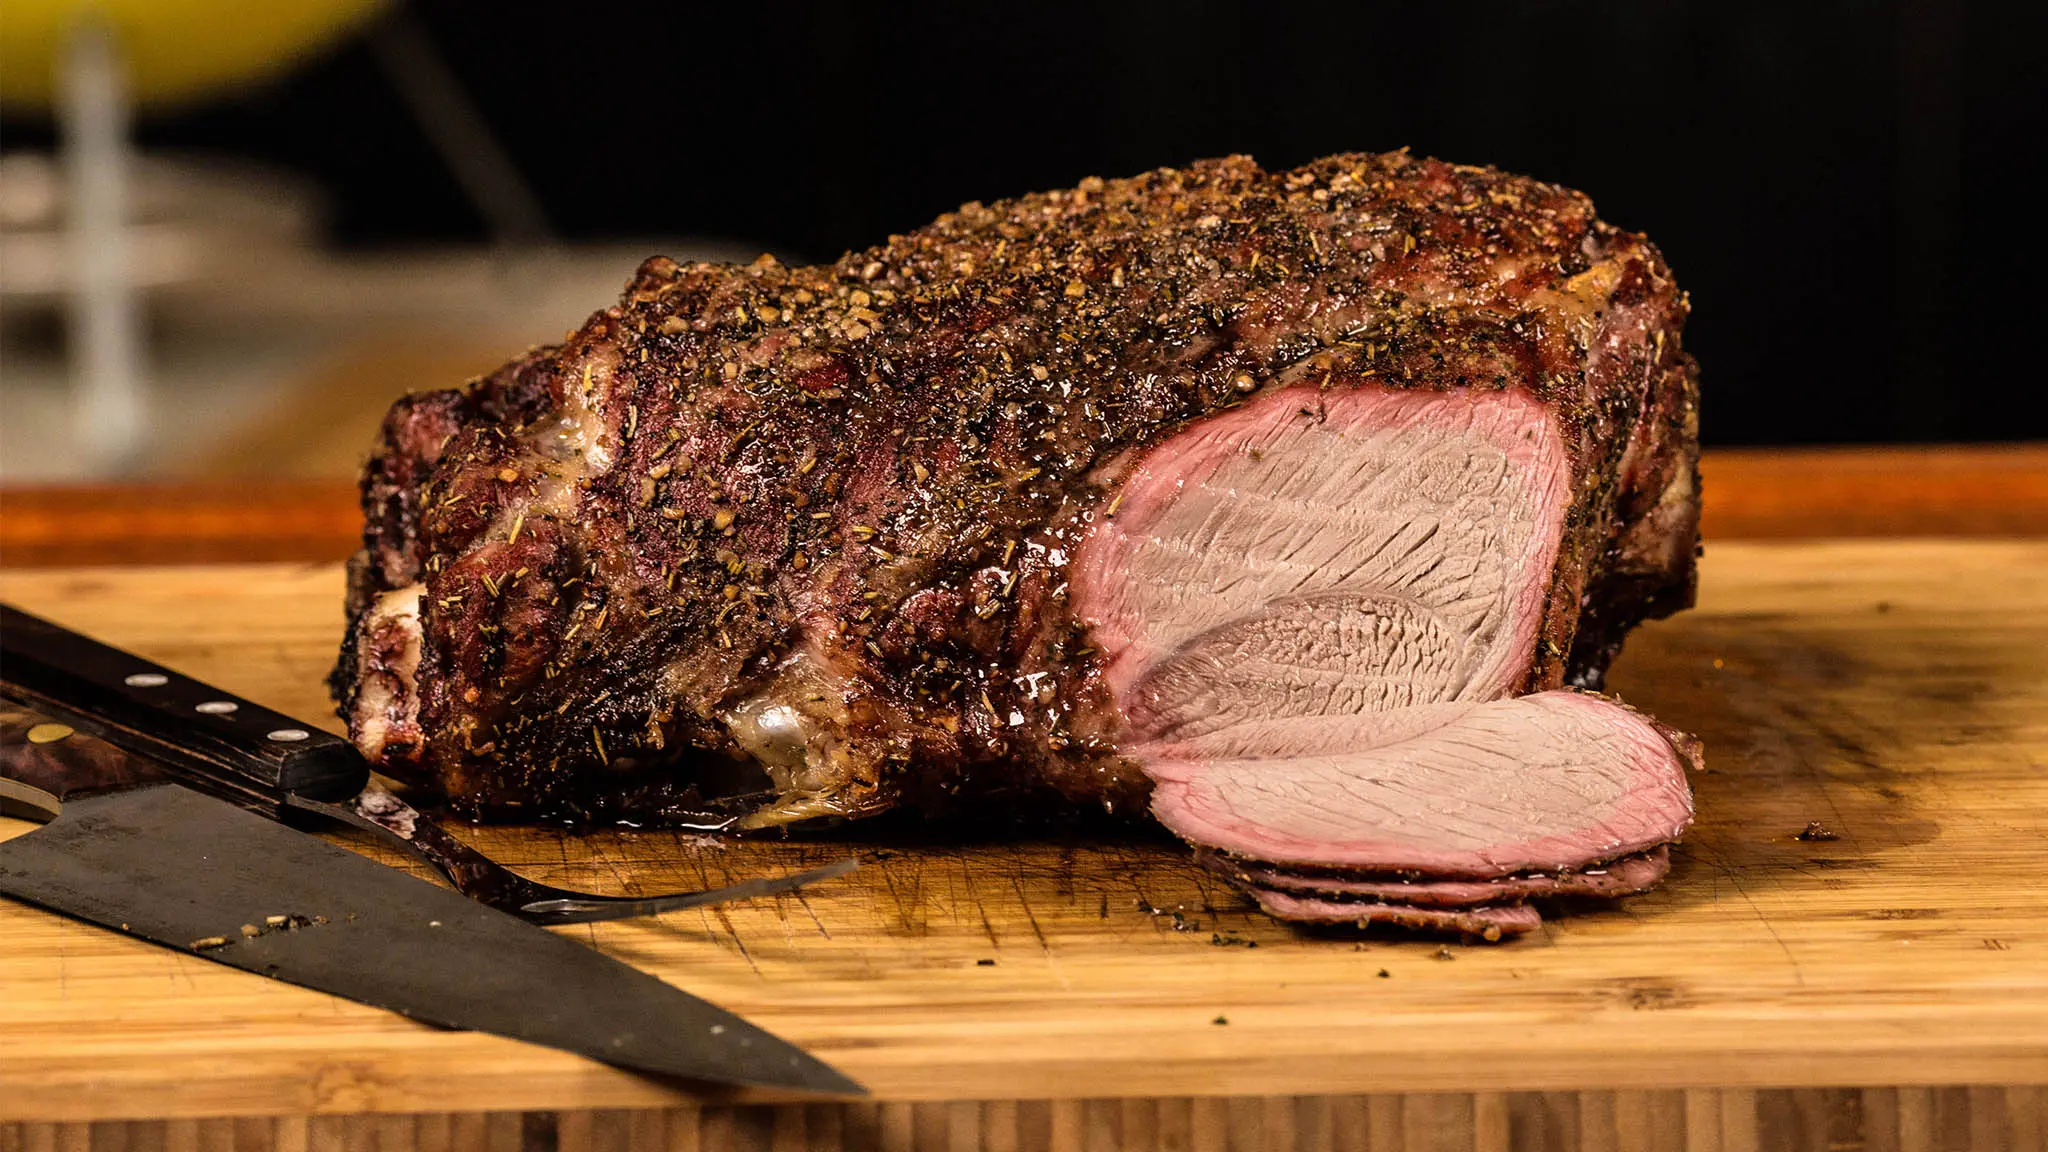 smoked lamb temperature celsius - What temperature should lamb be cooked to Celsius